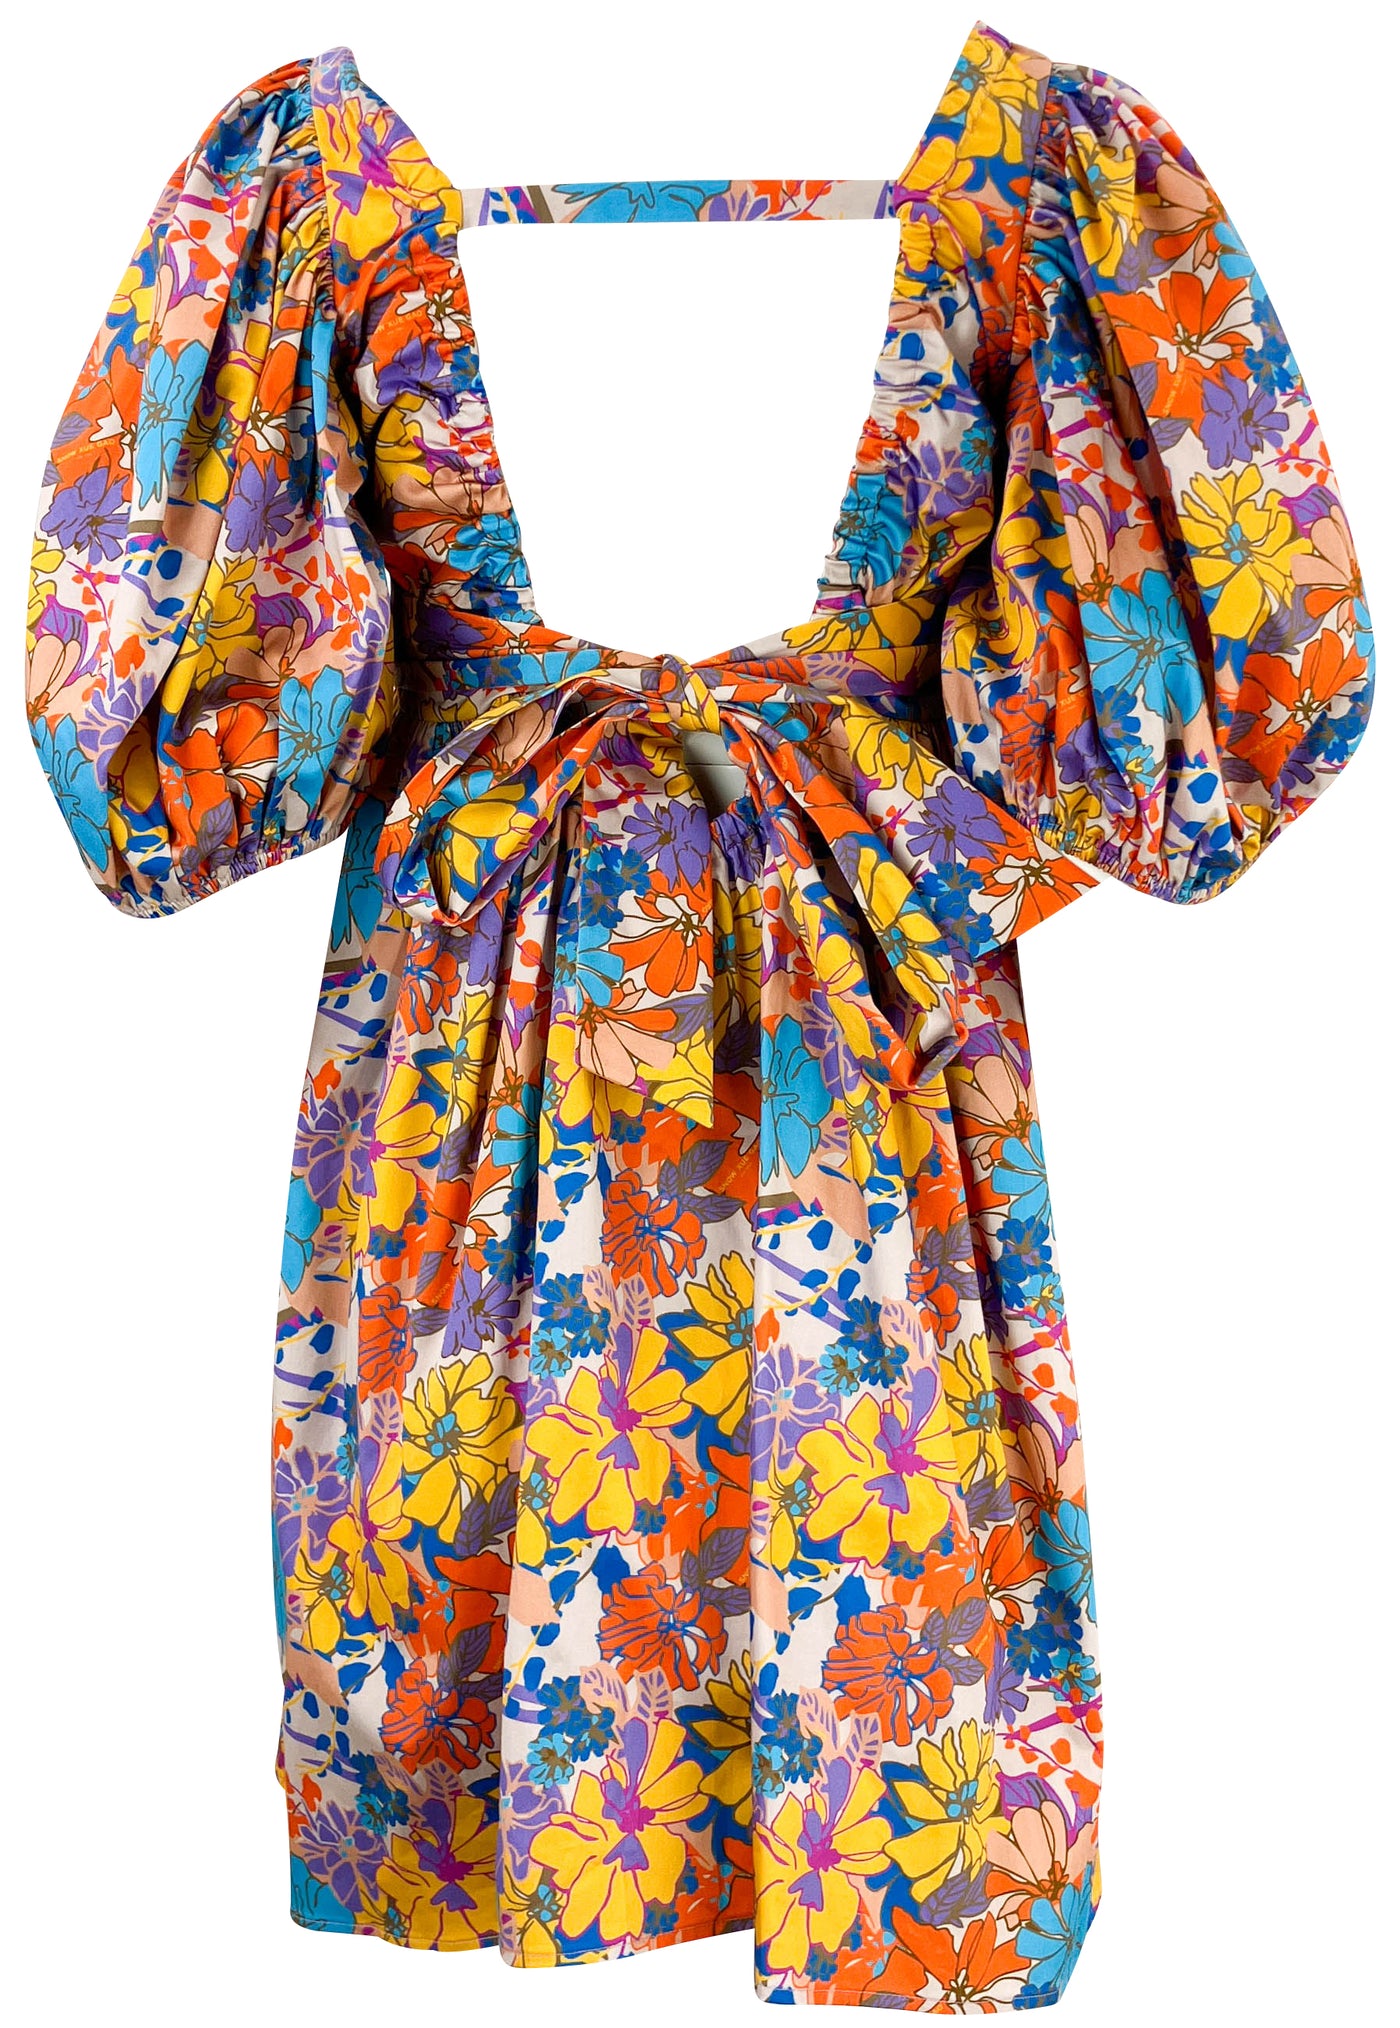 Snow Xue Gao Floral Print Babydoll Dress in Orange - Discounts on Snow Xue Gao at UAL